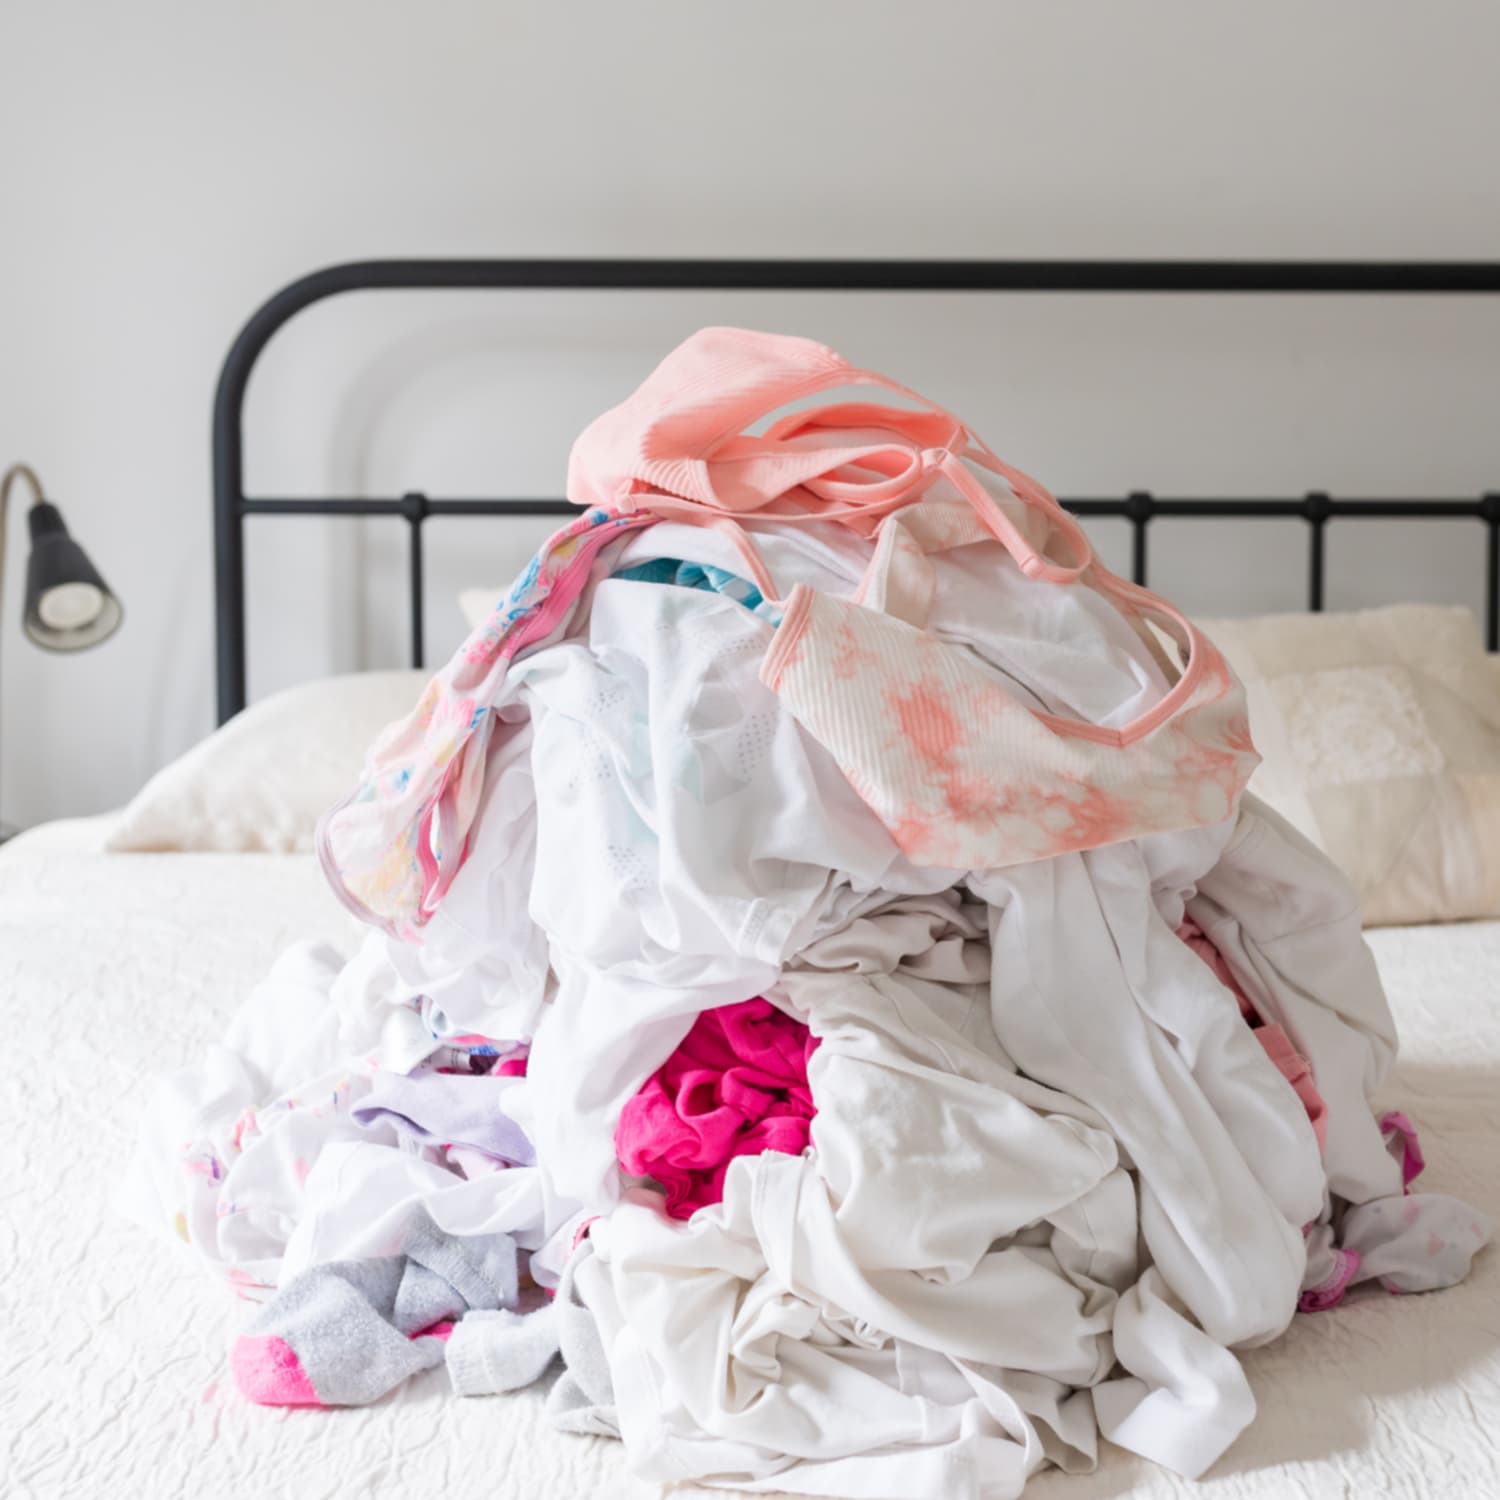 How To Remove Mold Mildew Smell From Clothes: Eliminate Odors And Refresh Your Wardrobe